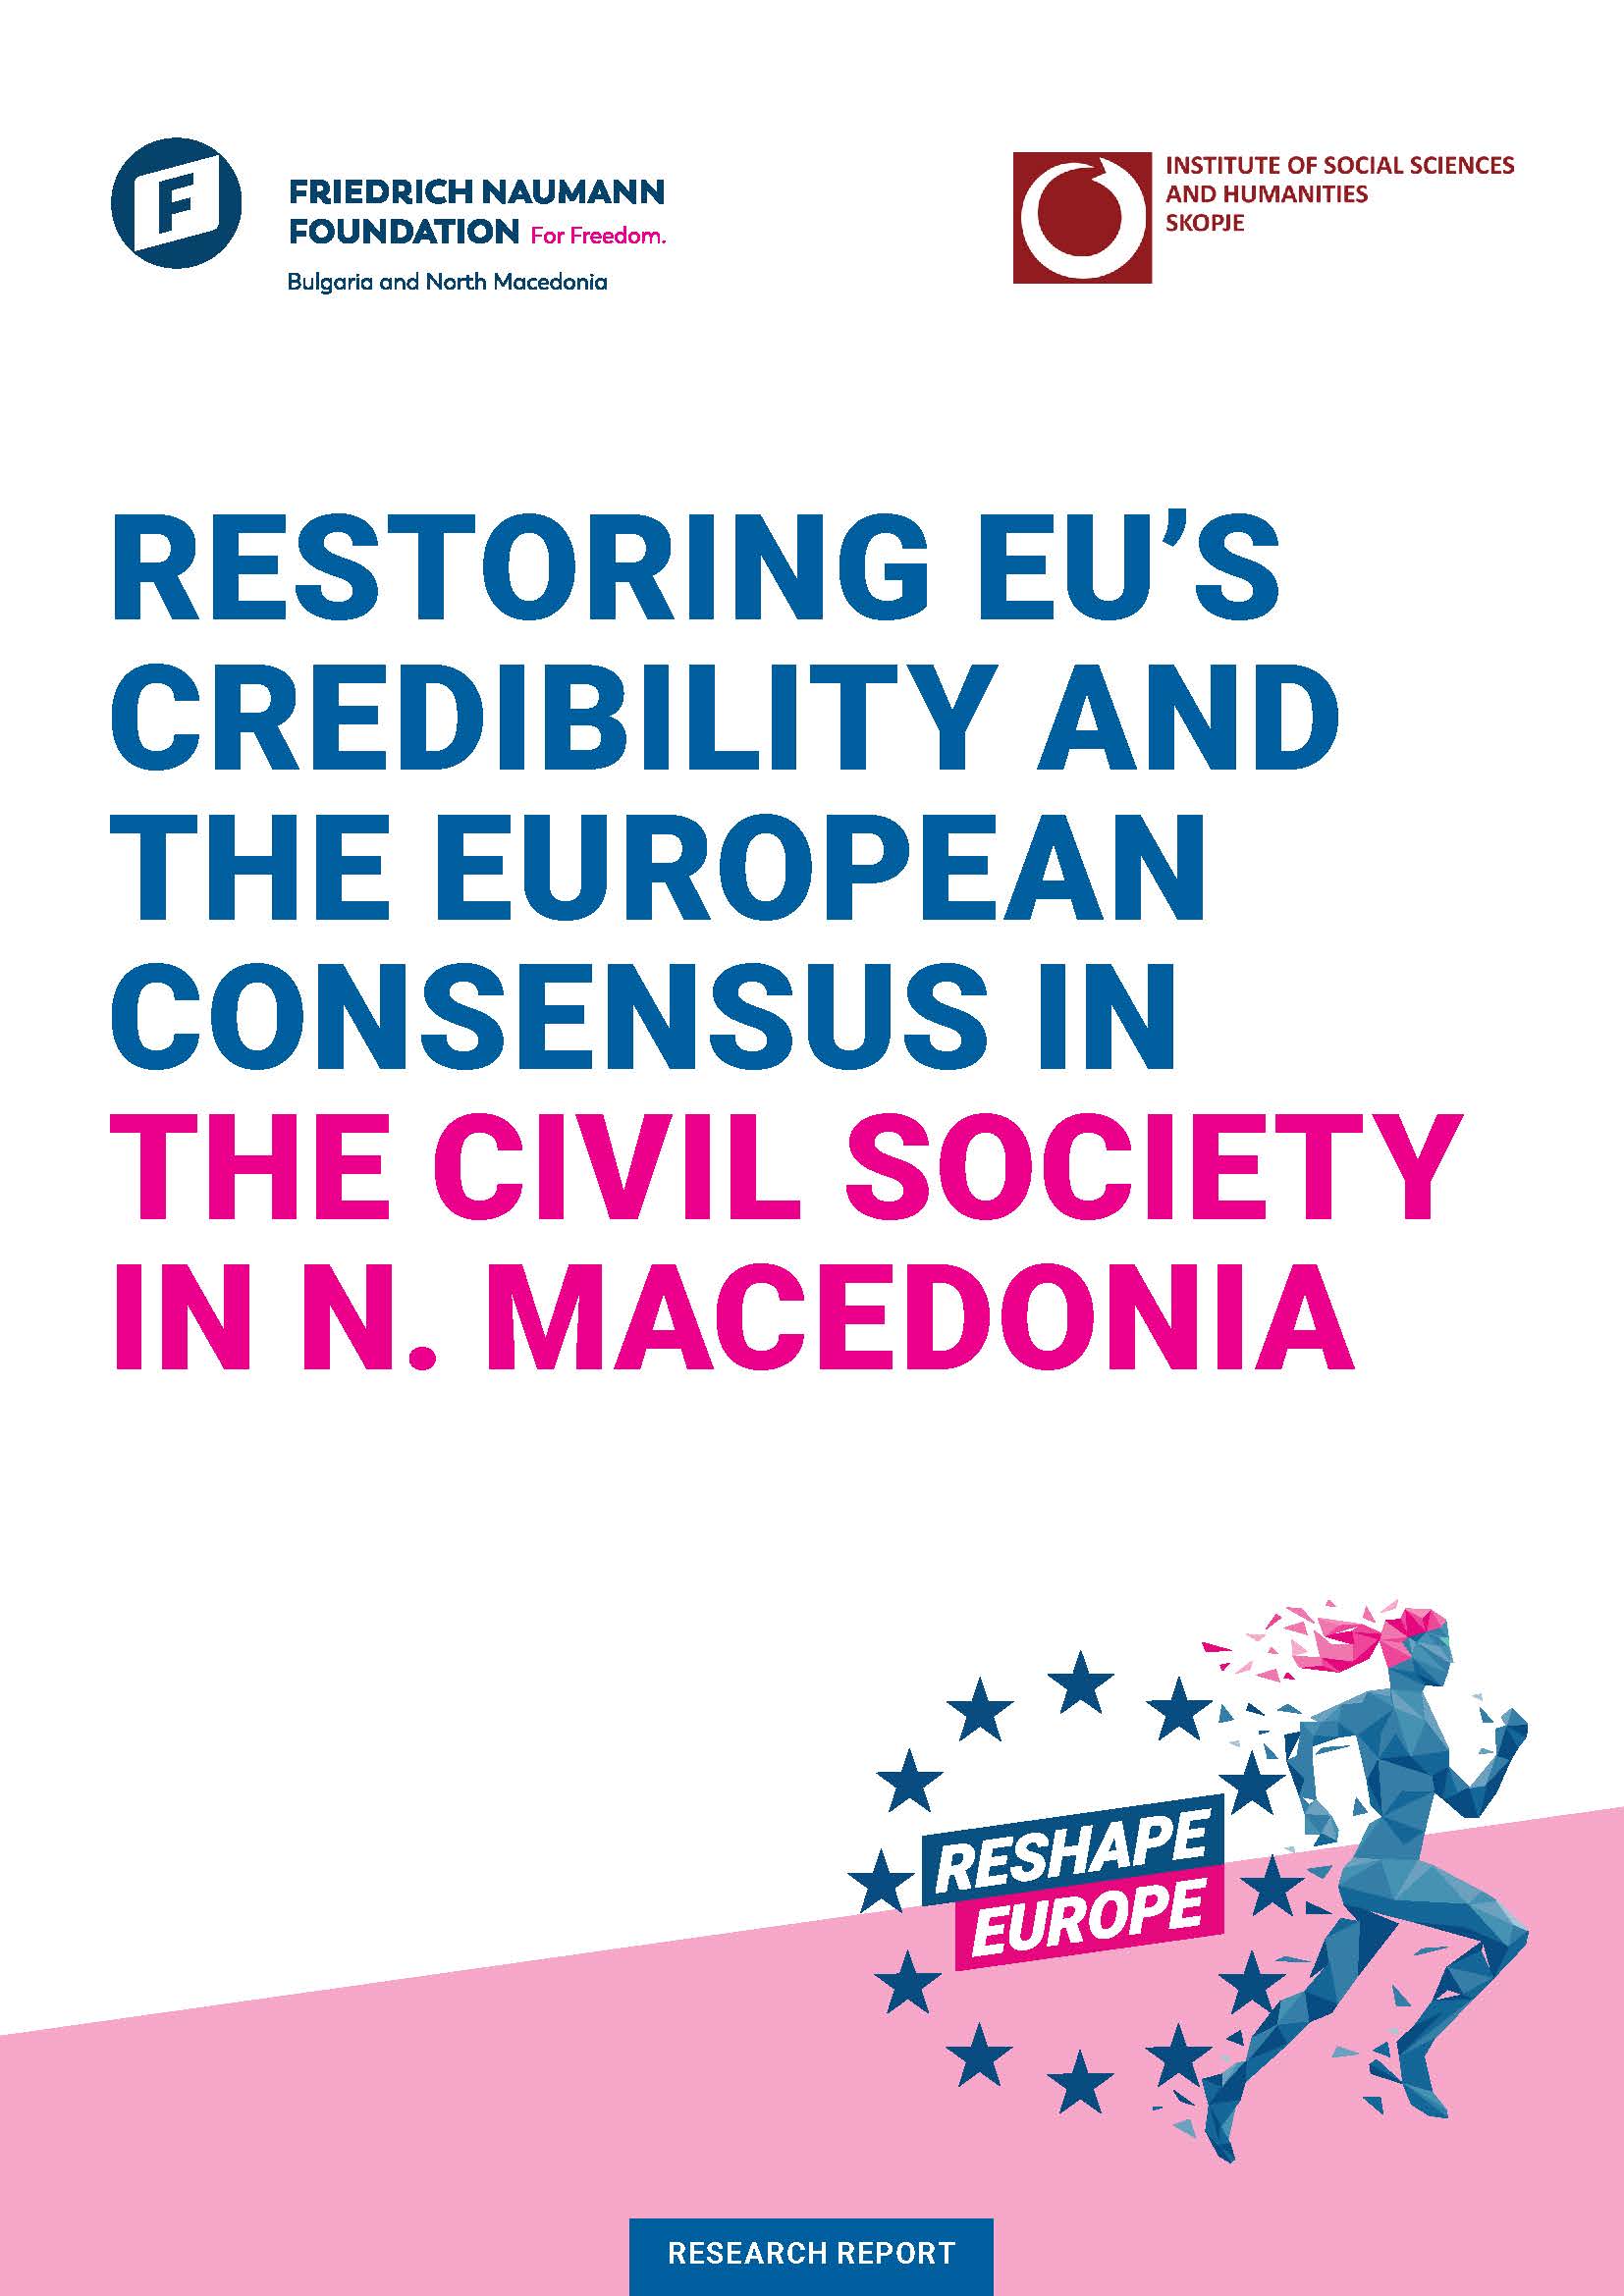 RESTORING EU’S CREDIBILITY AND THE EUROPEAN CONSENSUS IN THE CIVIL SOCIETY IN N. MACEDONIA